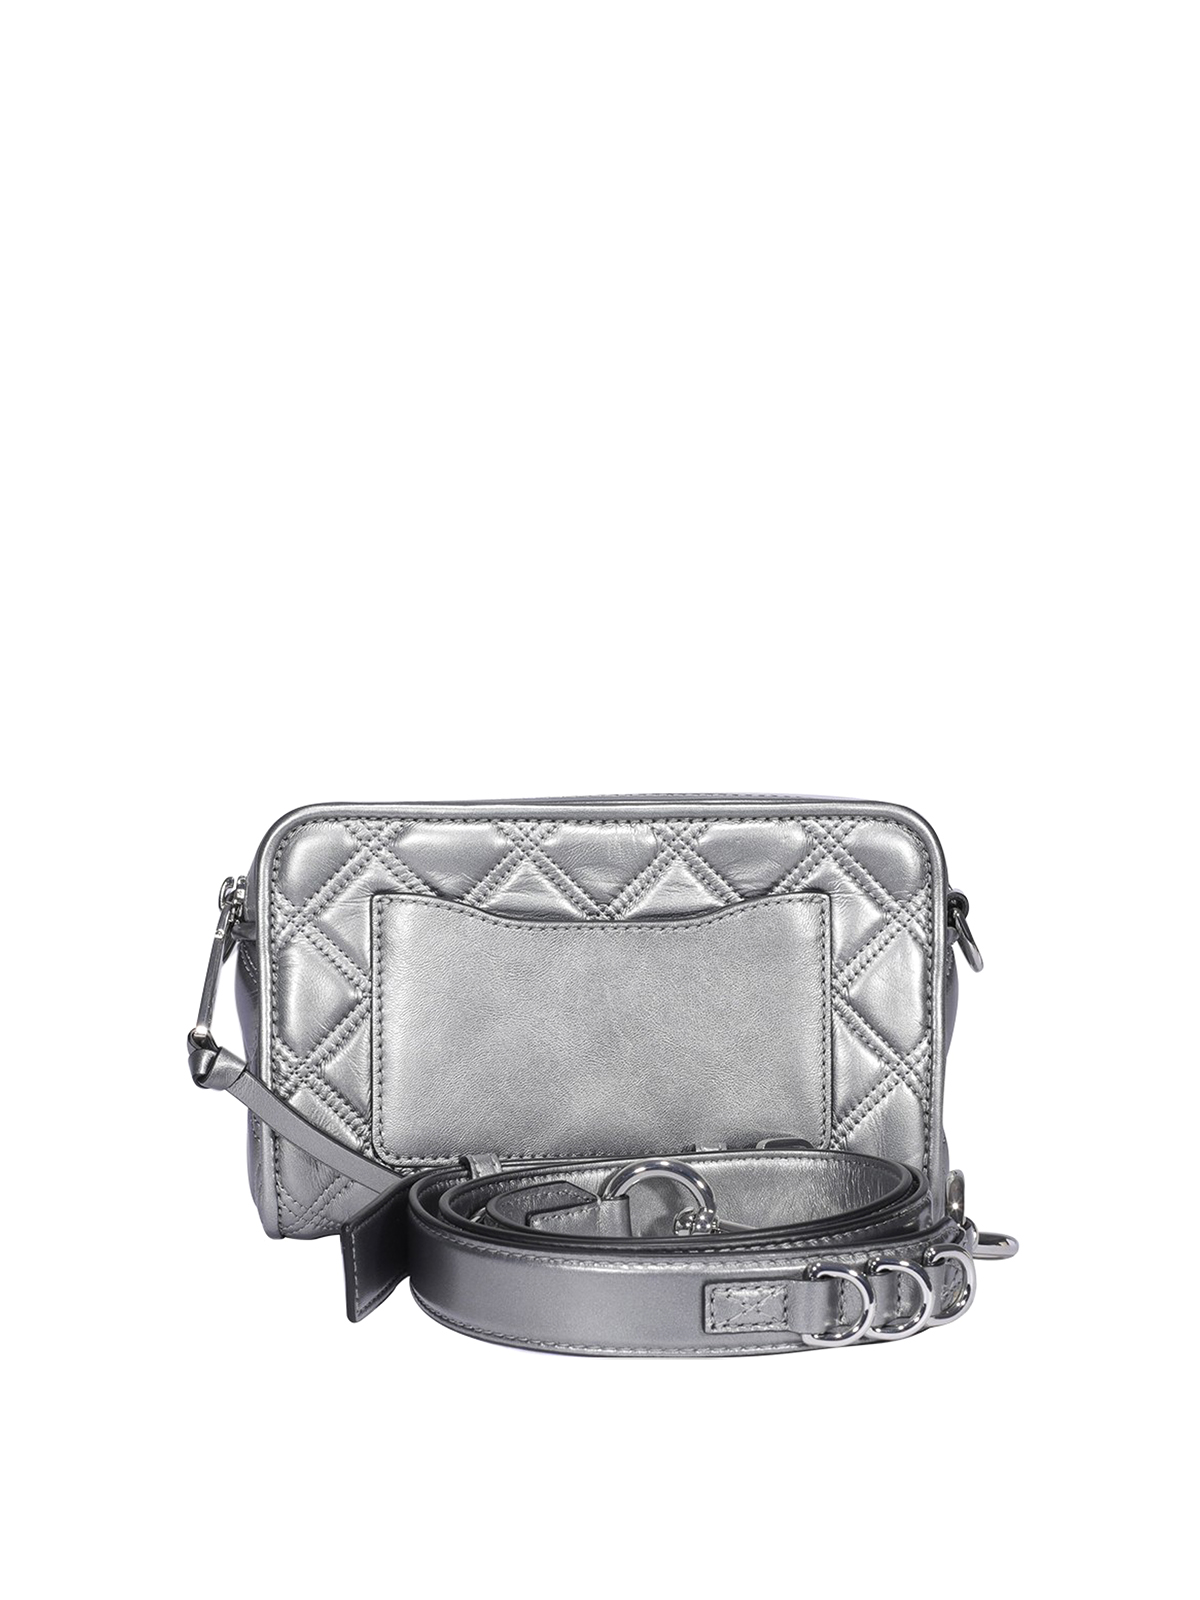 Marc Jacobs Quilted Softshot 21 Crossbody Bag